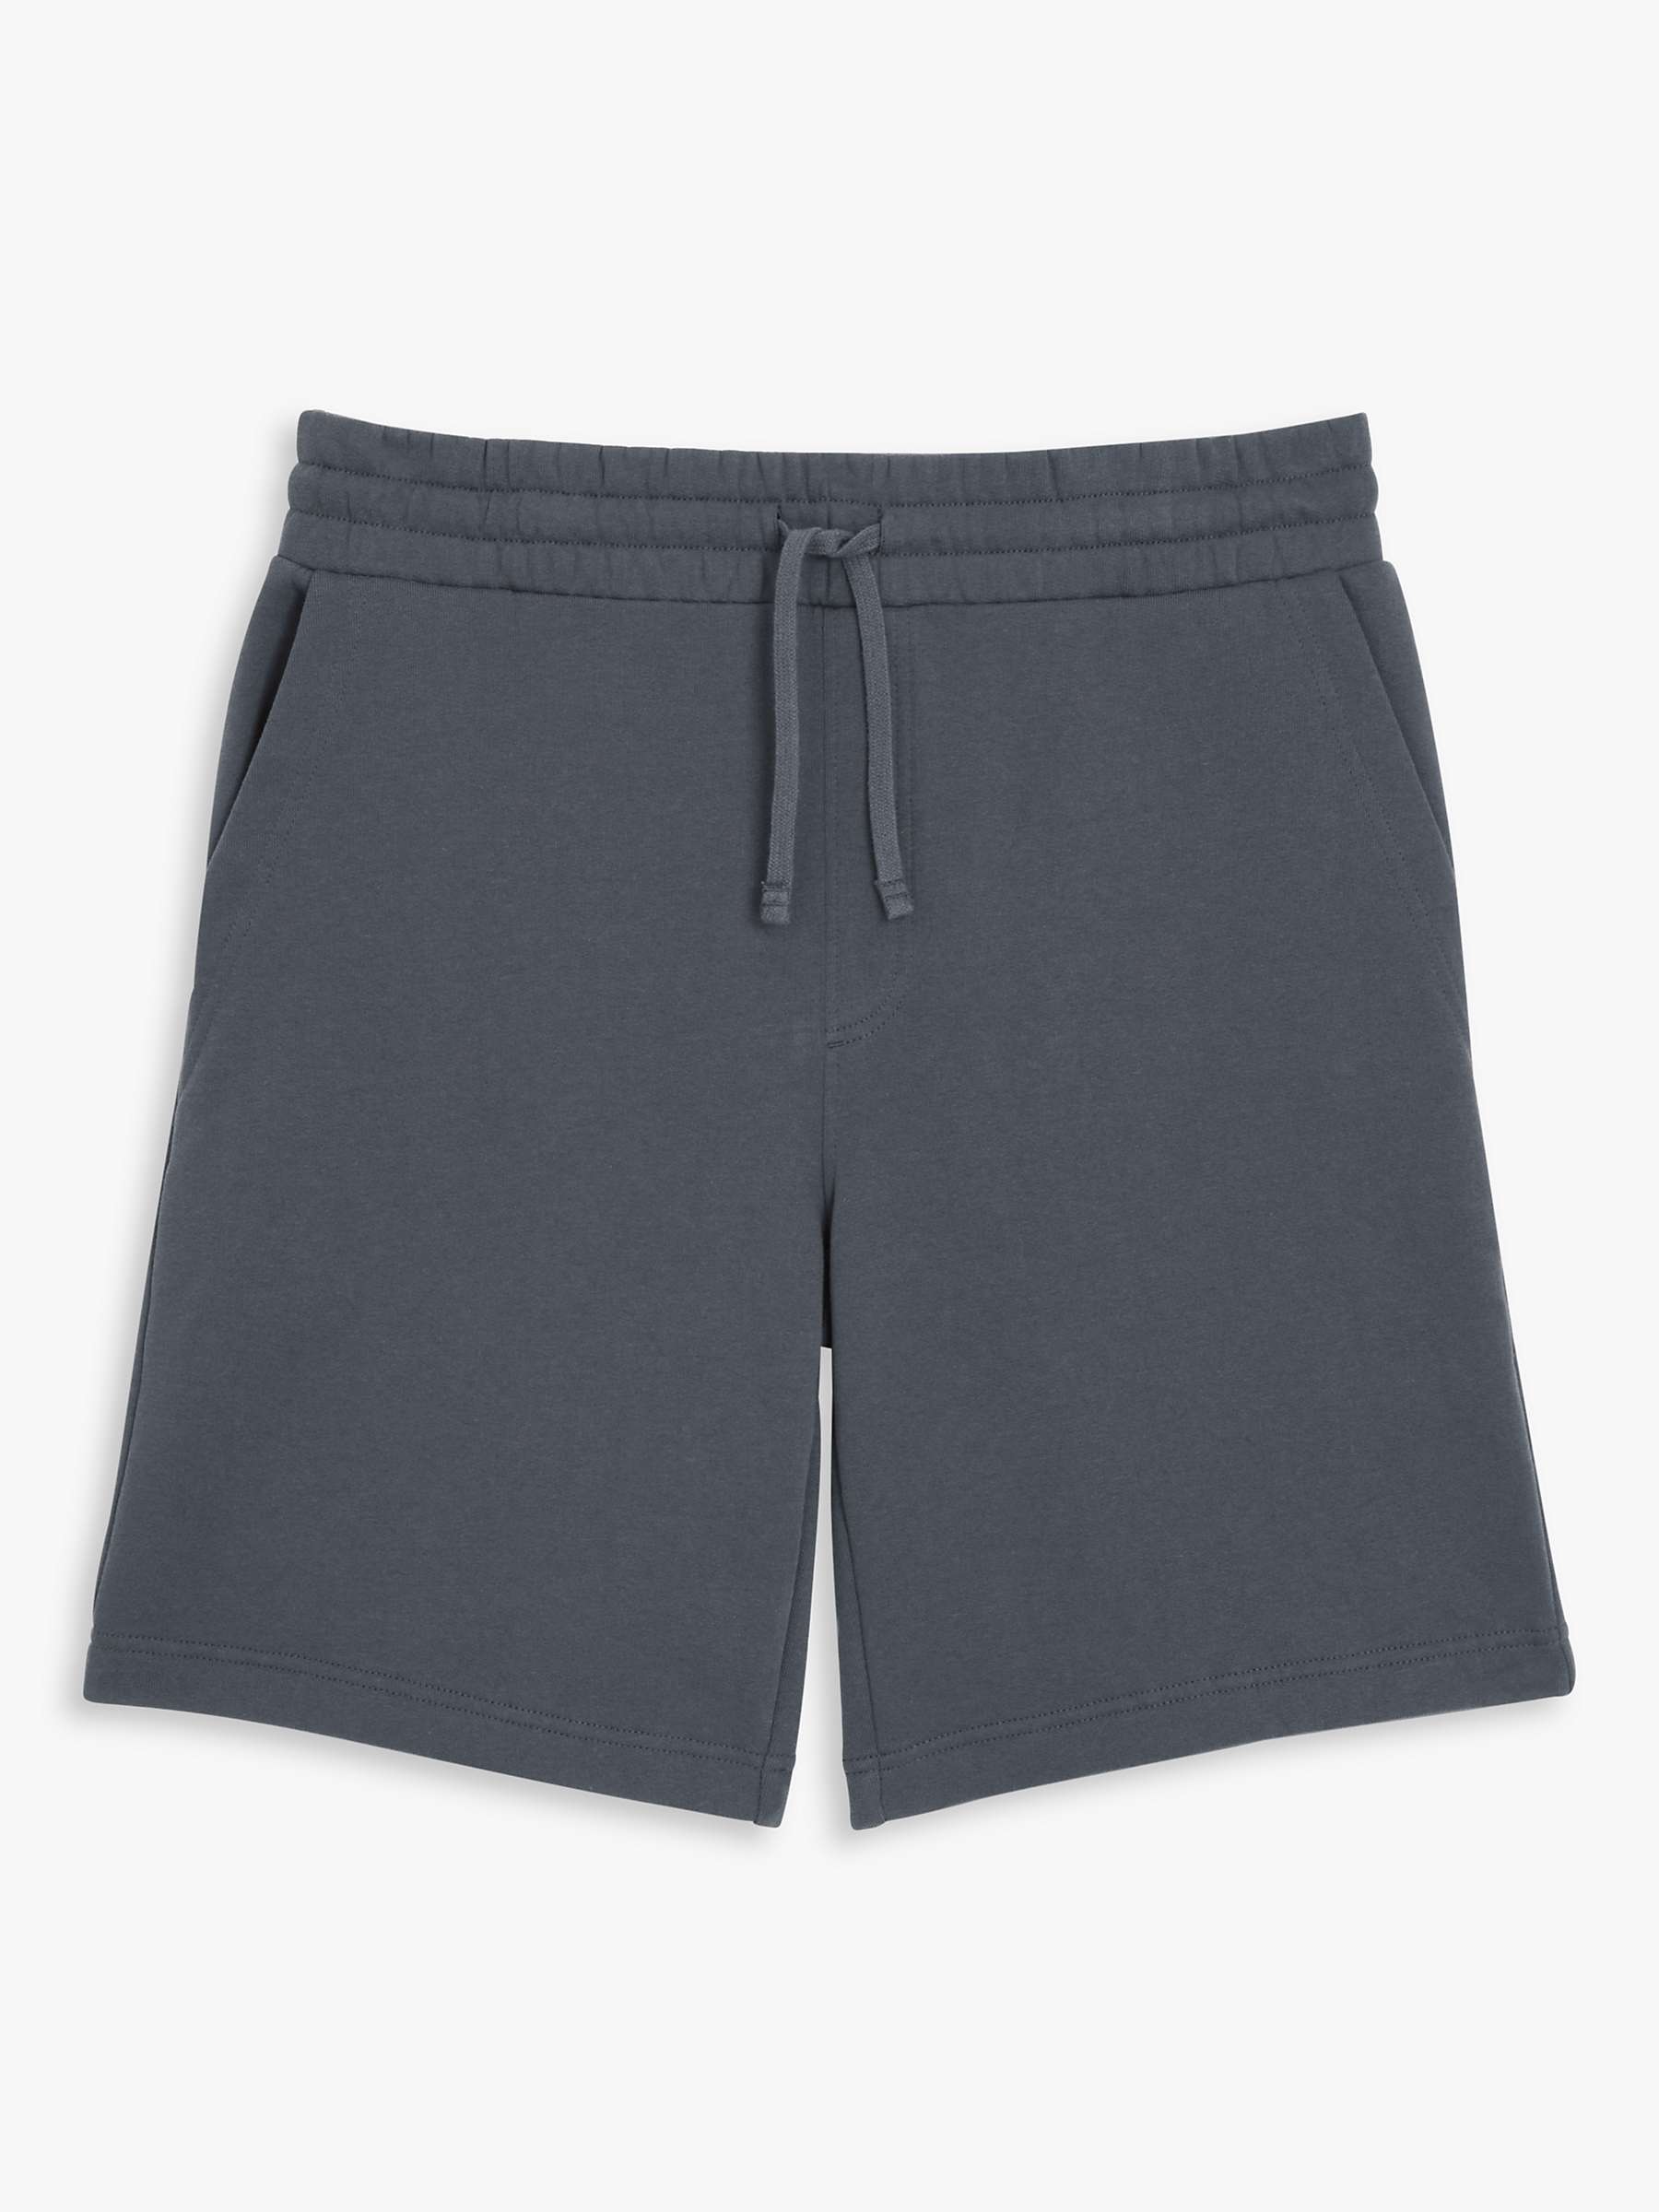 Buy John Lewis ANYDAY Casual Sweat Shorts Online at johnlewis.com